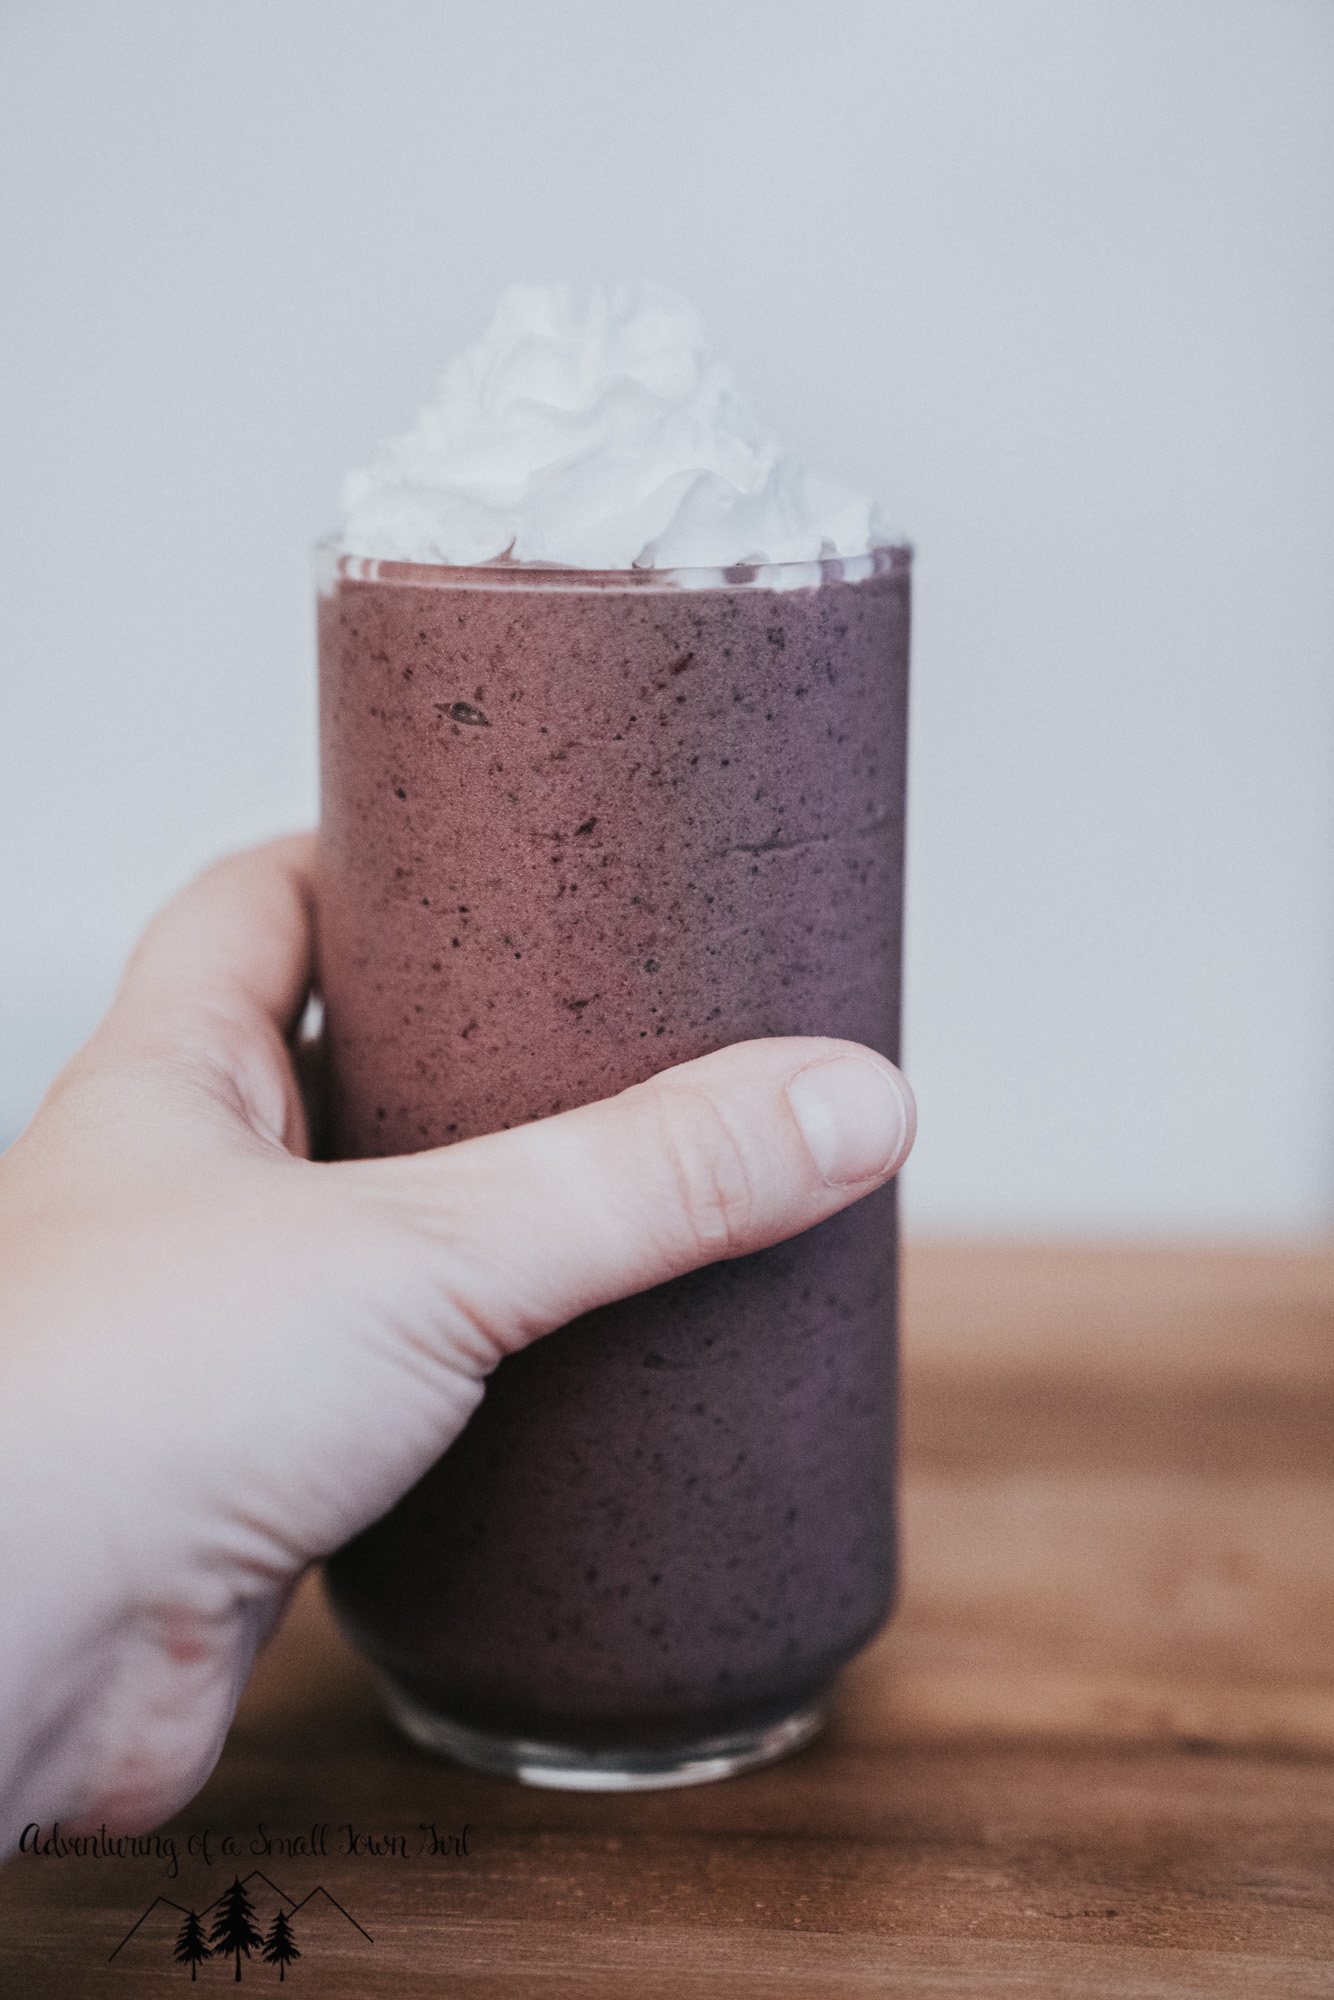 5 Ingredient Blackberry Smoothie Recipe by Adventuring of a Small Town Girl-4.jpg